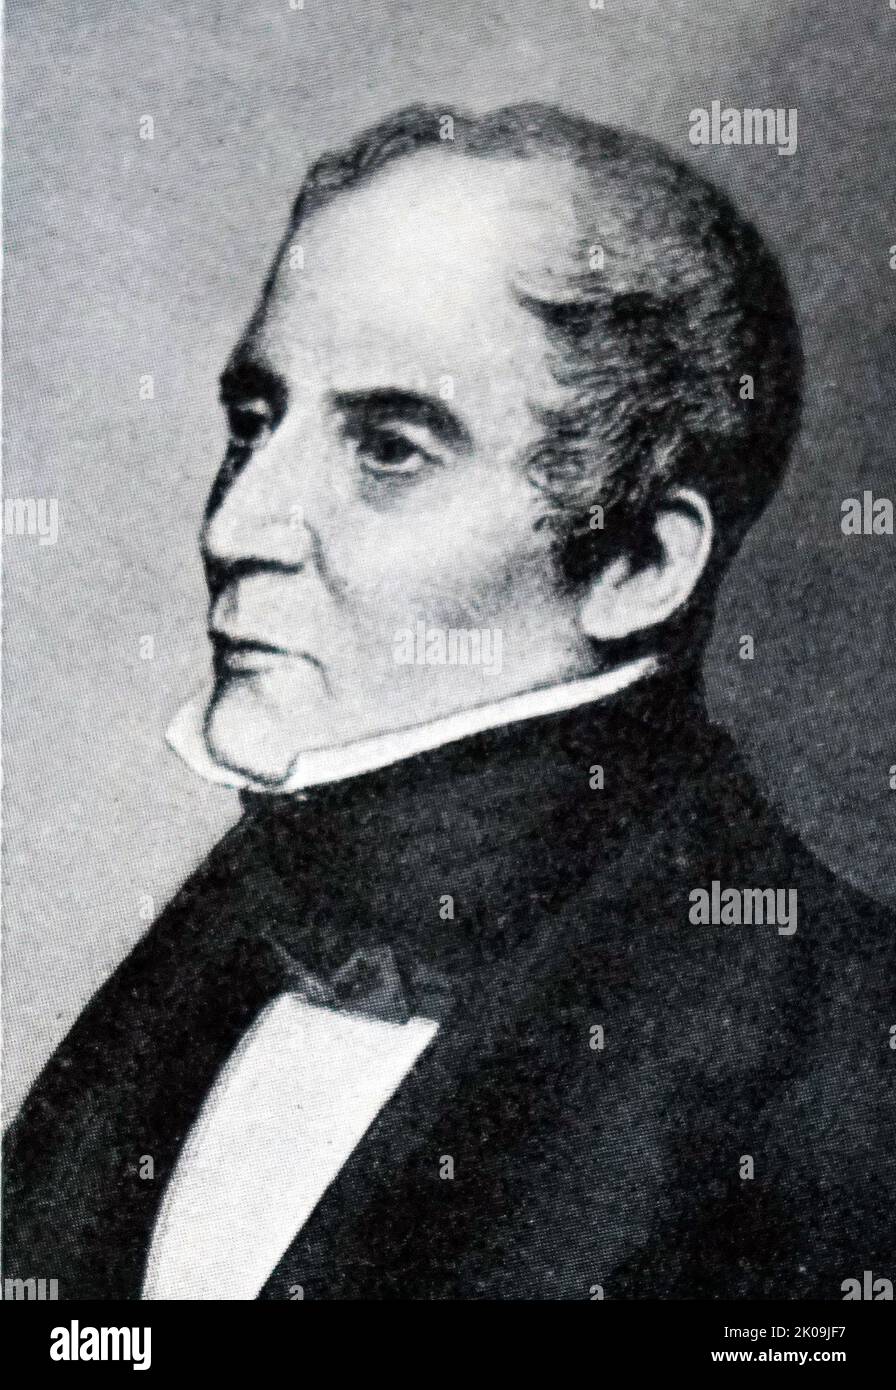 Sir George Arthur, (1784 - 1854) Lieutenant Governor of British Honduras from 1814 to 1822, Van Diemen's Land (present-day Tasmania) from 1823 to 1837. The malicious campaign against Aboriginal Tasmanians, known as the Black War, occurred during this term of office. He later served as Lieutenant Governor of Upper Canada from 1838 to 1841, and Governor of Bombay from 1842 to 1846. Stock Photo